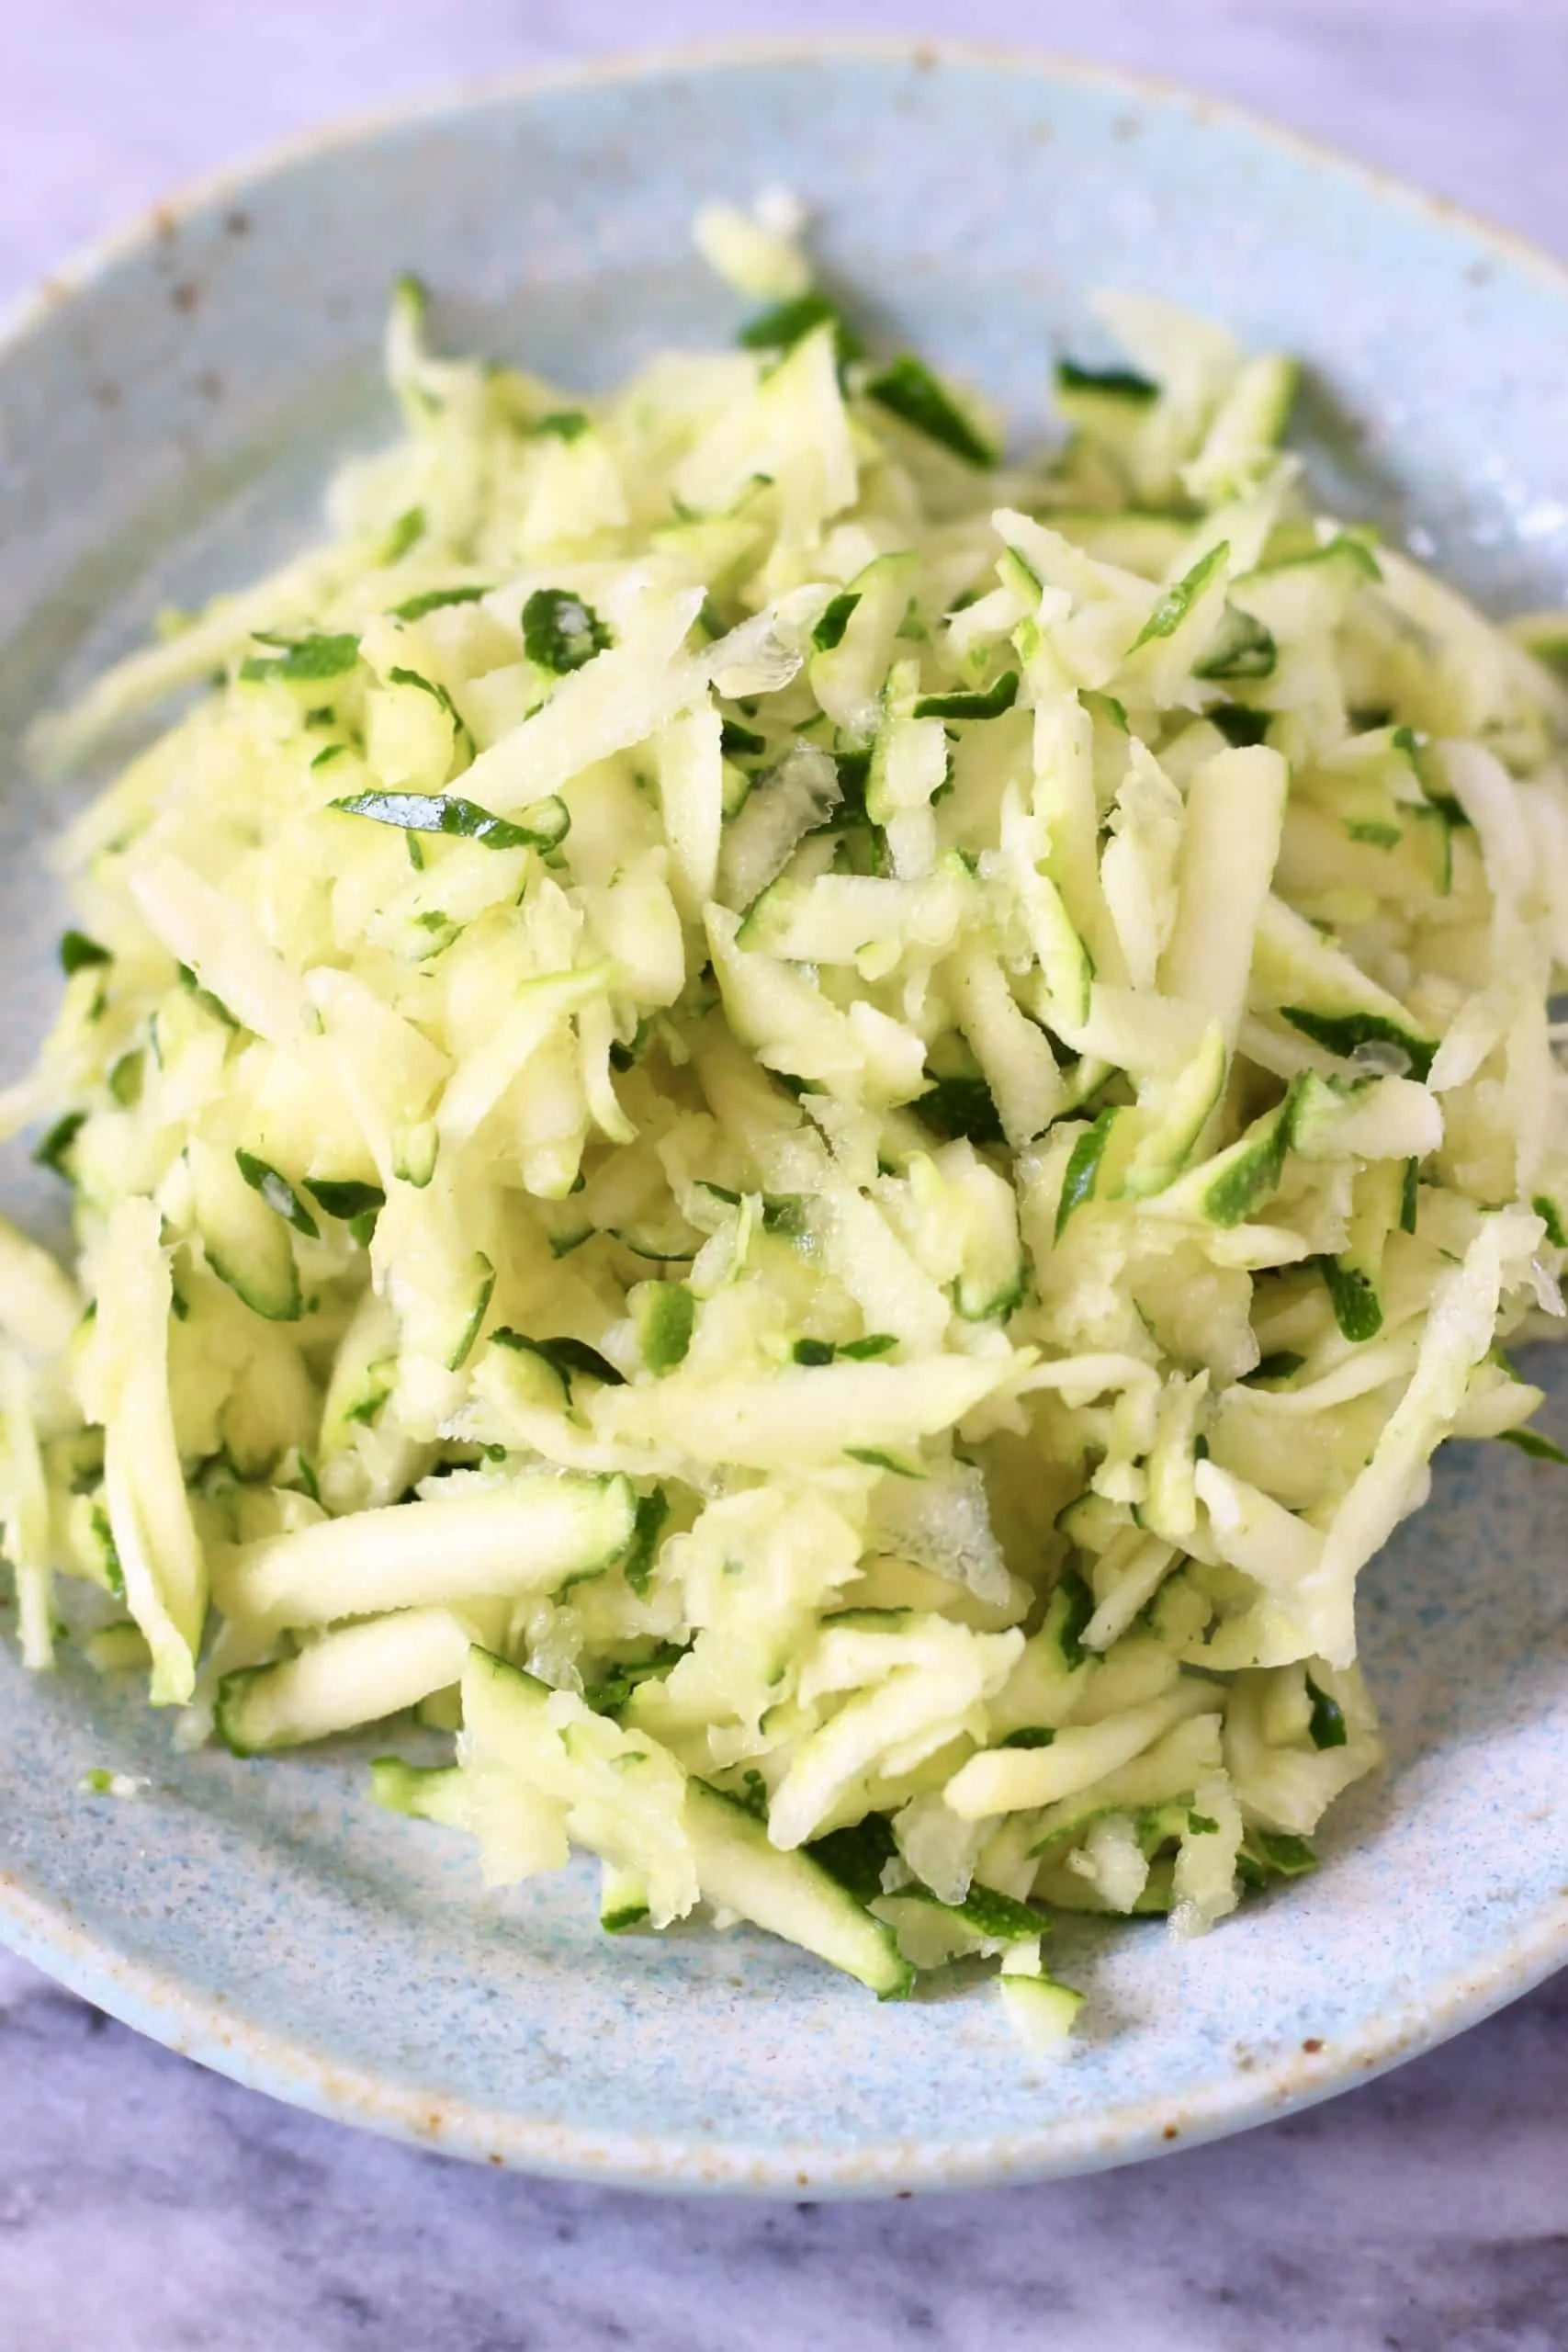 Grated zucchini on a blue plate